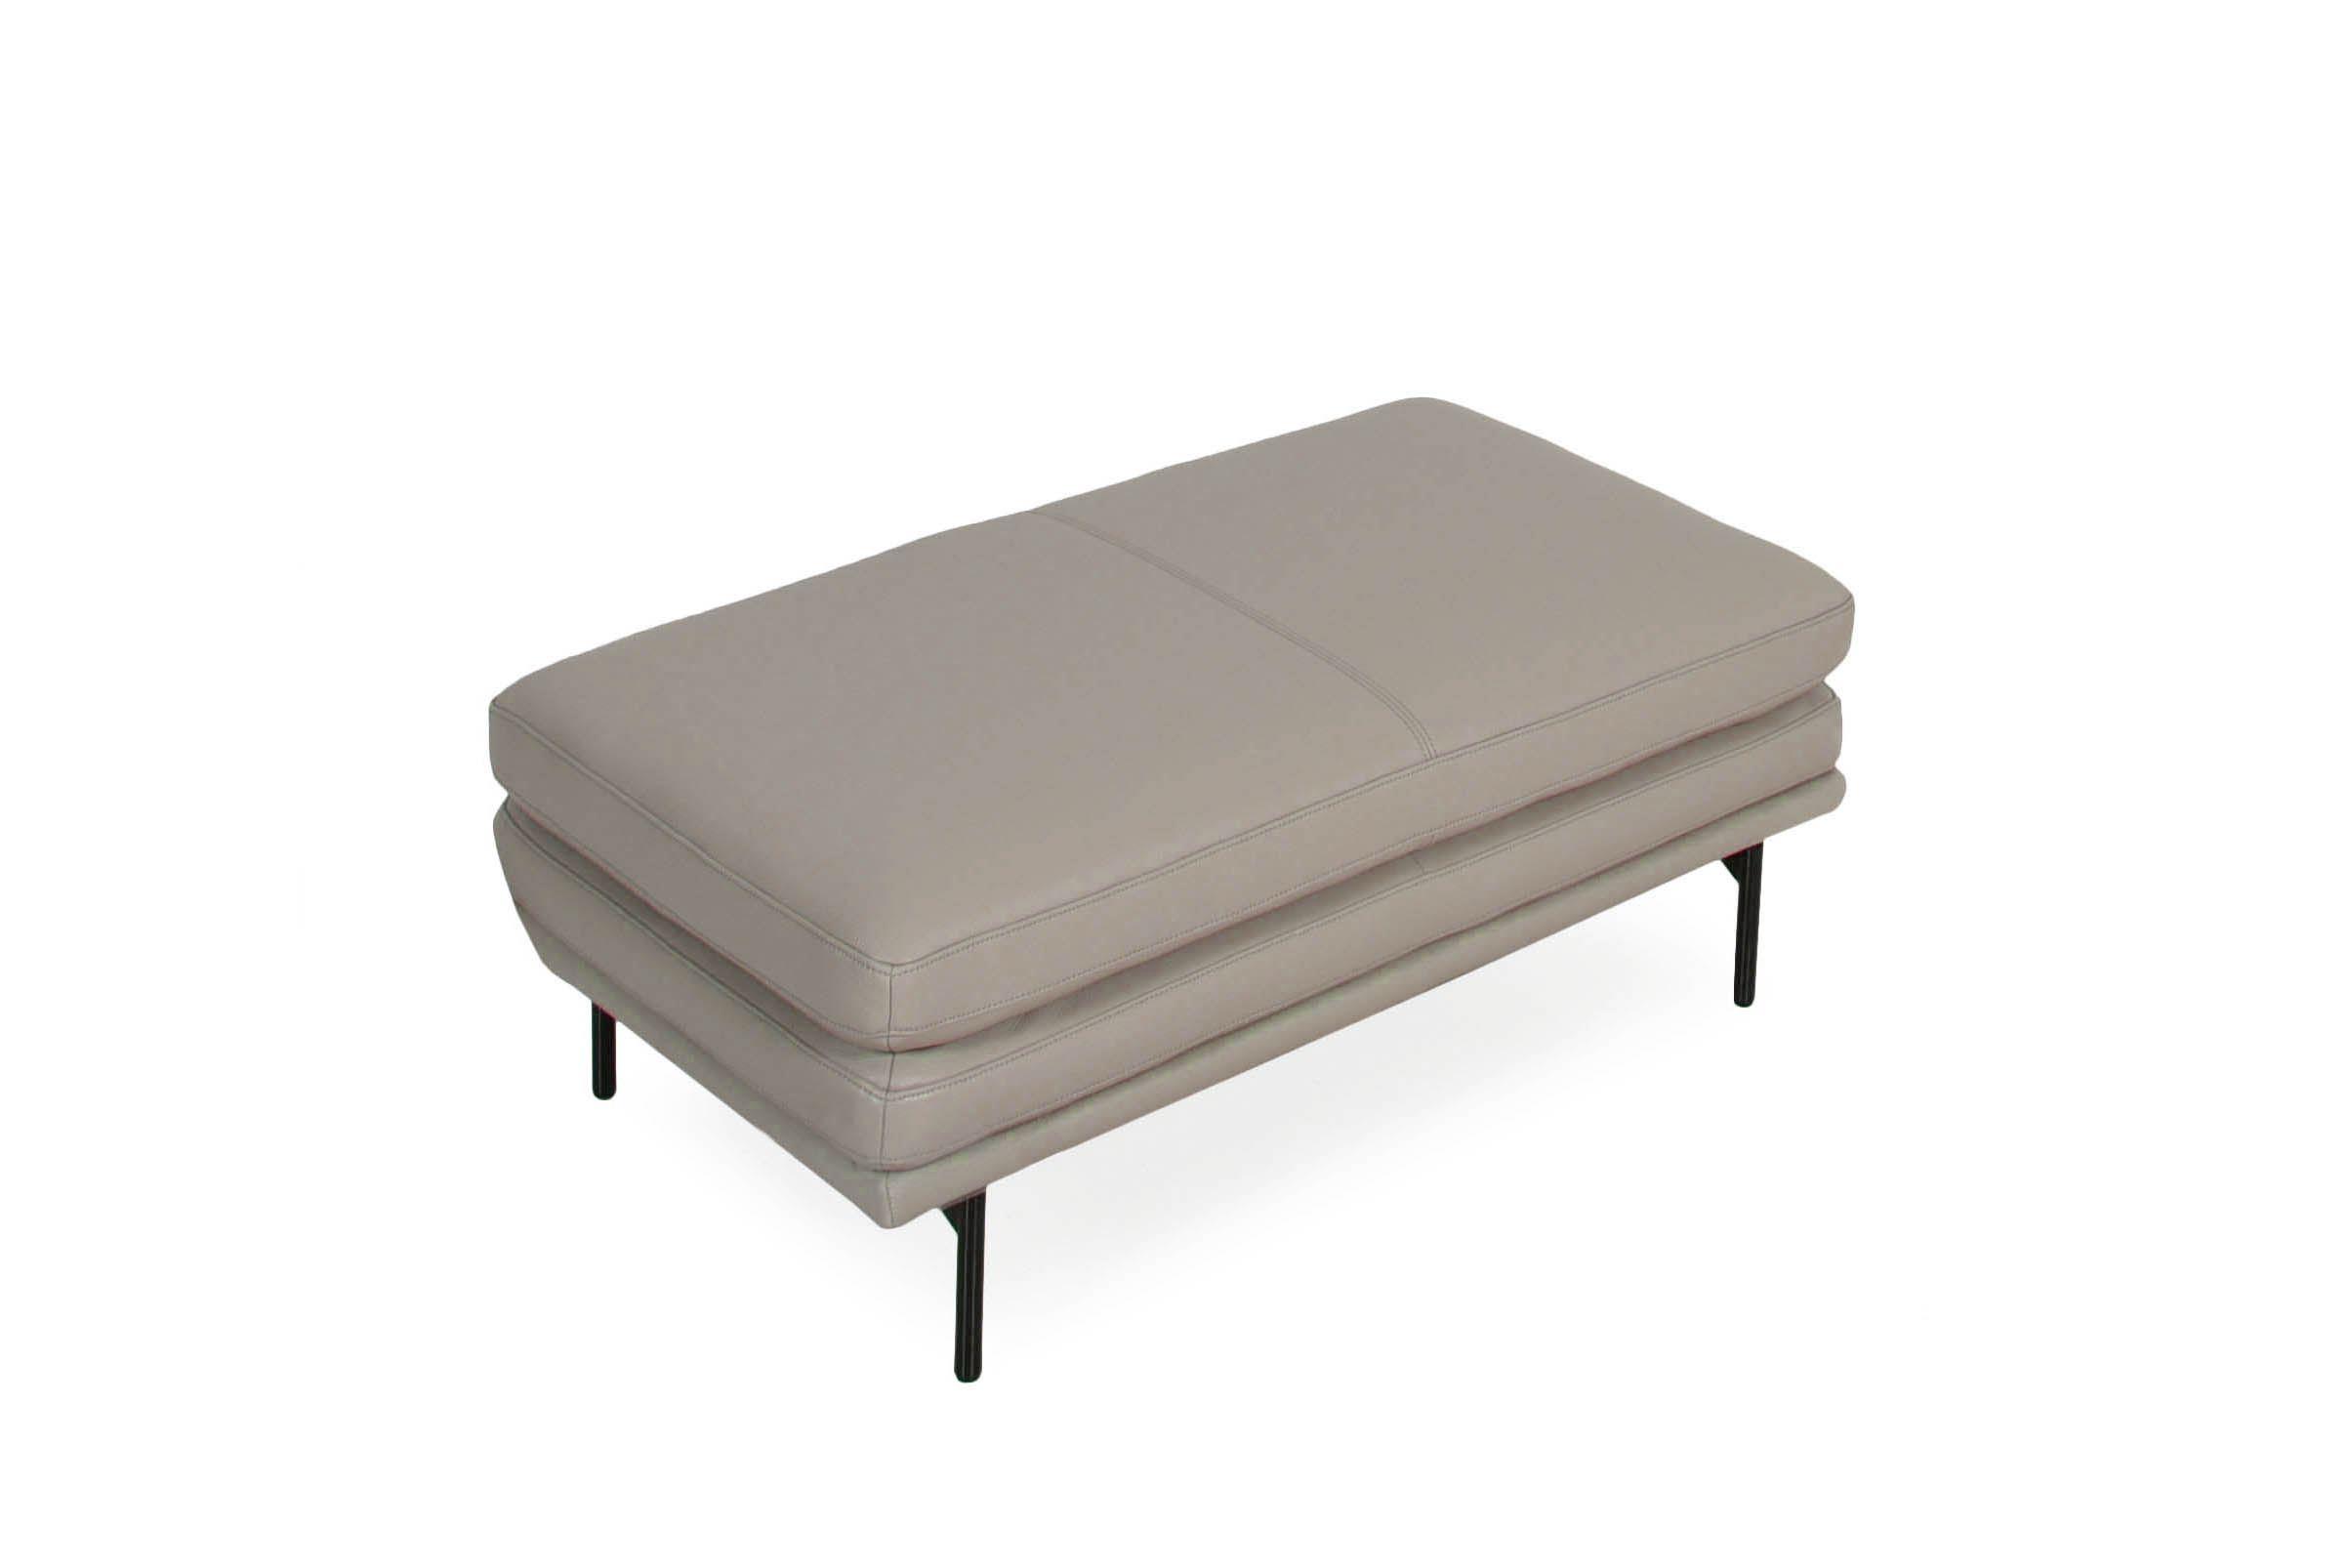 Contemporary, Modern Ottoman 442 McCoy 44246BS1383 in Light Gray Full Leather